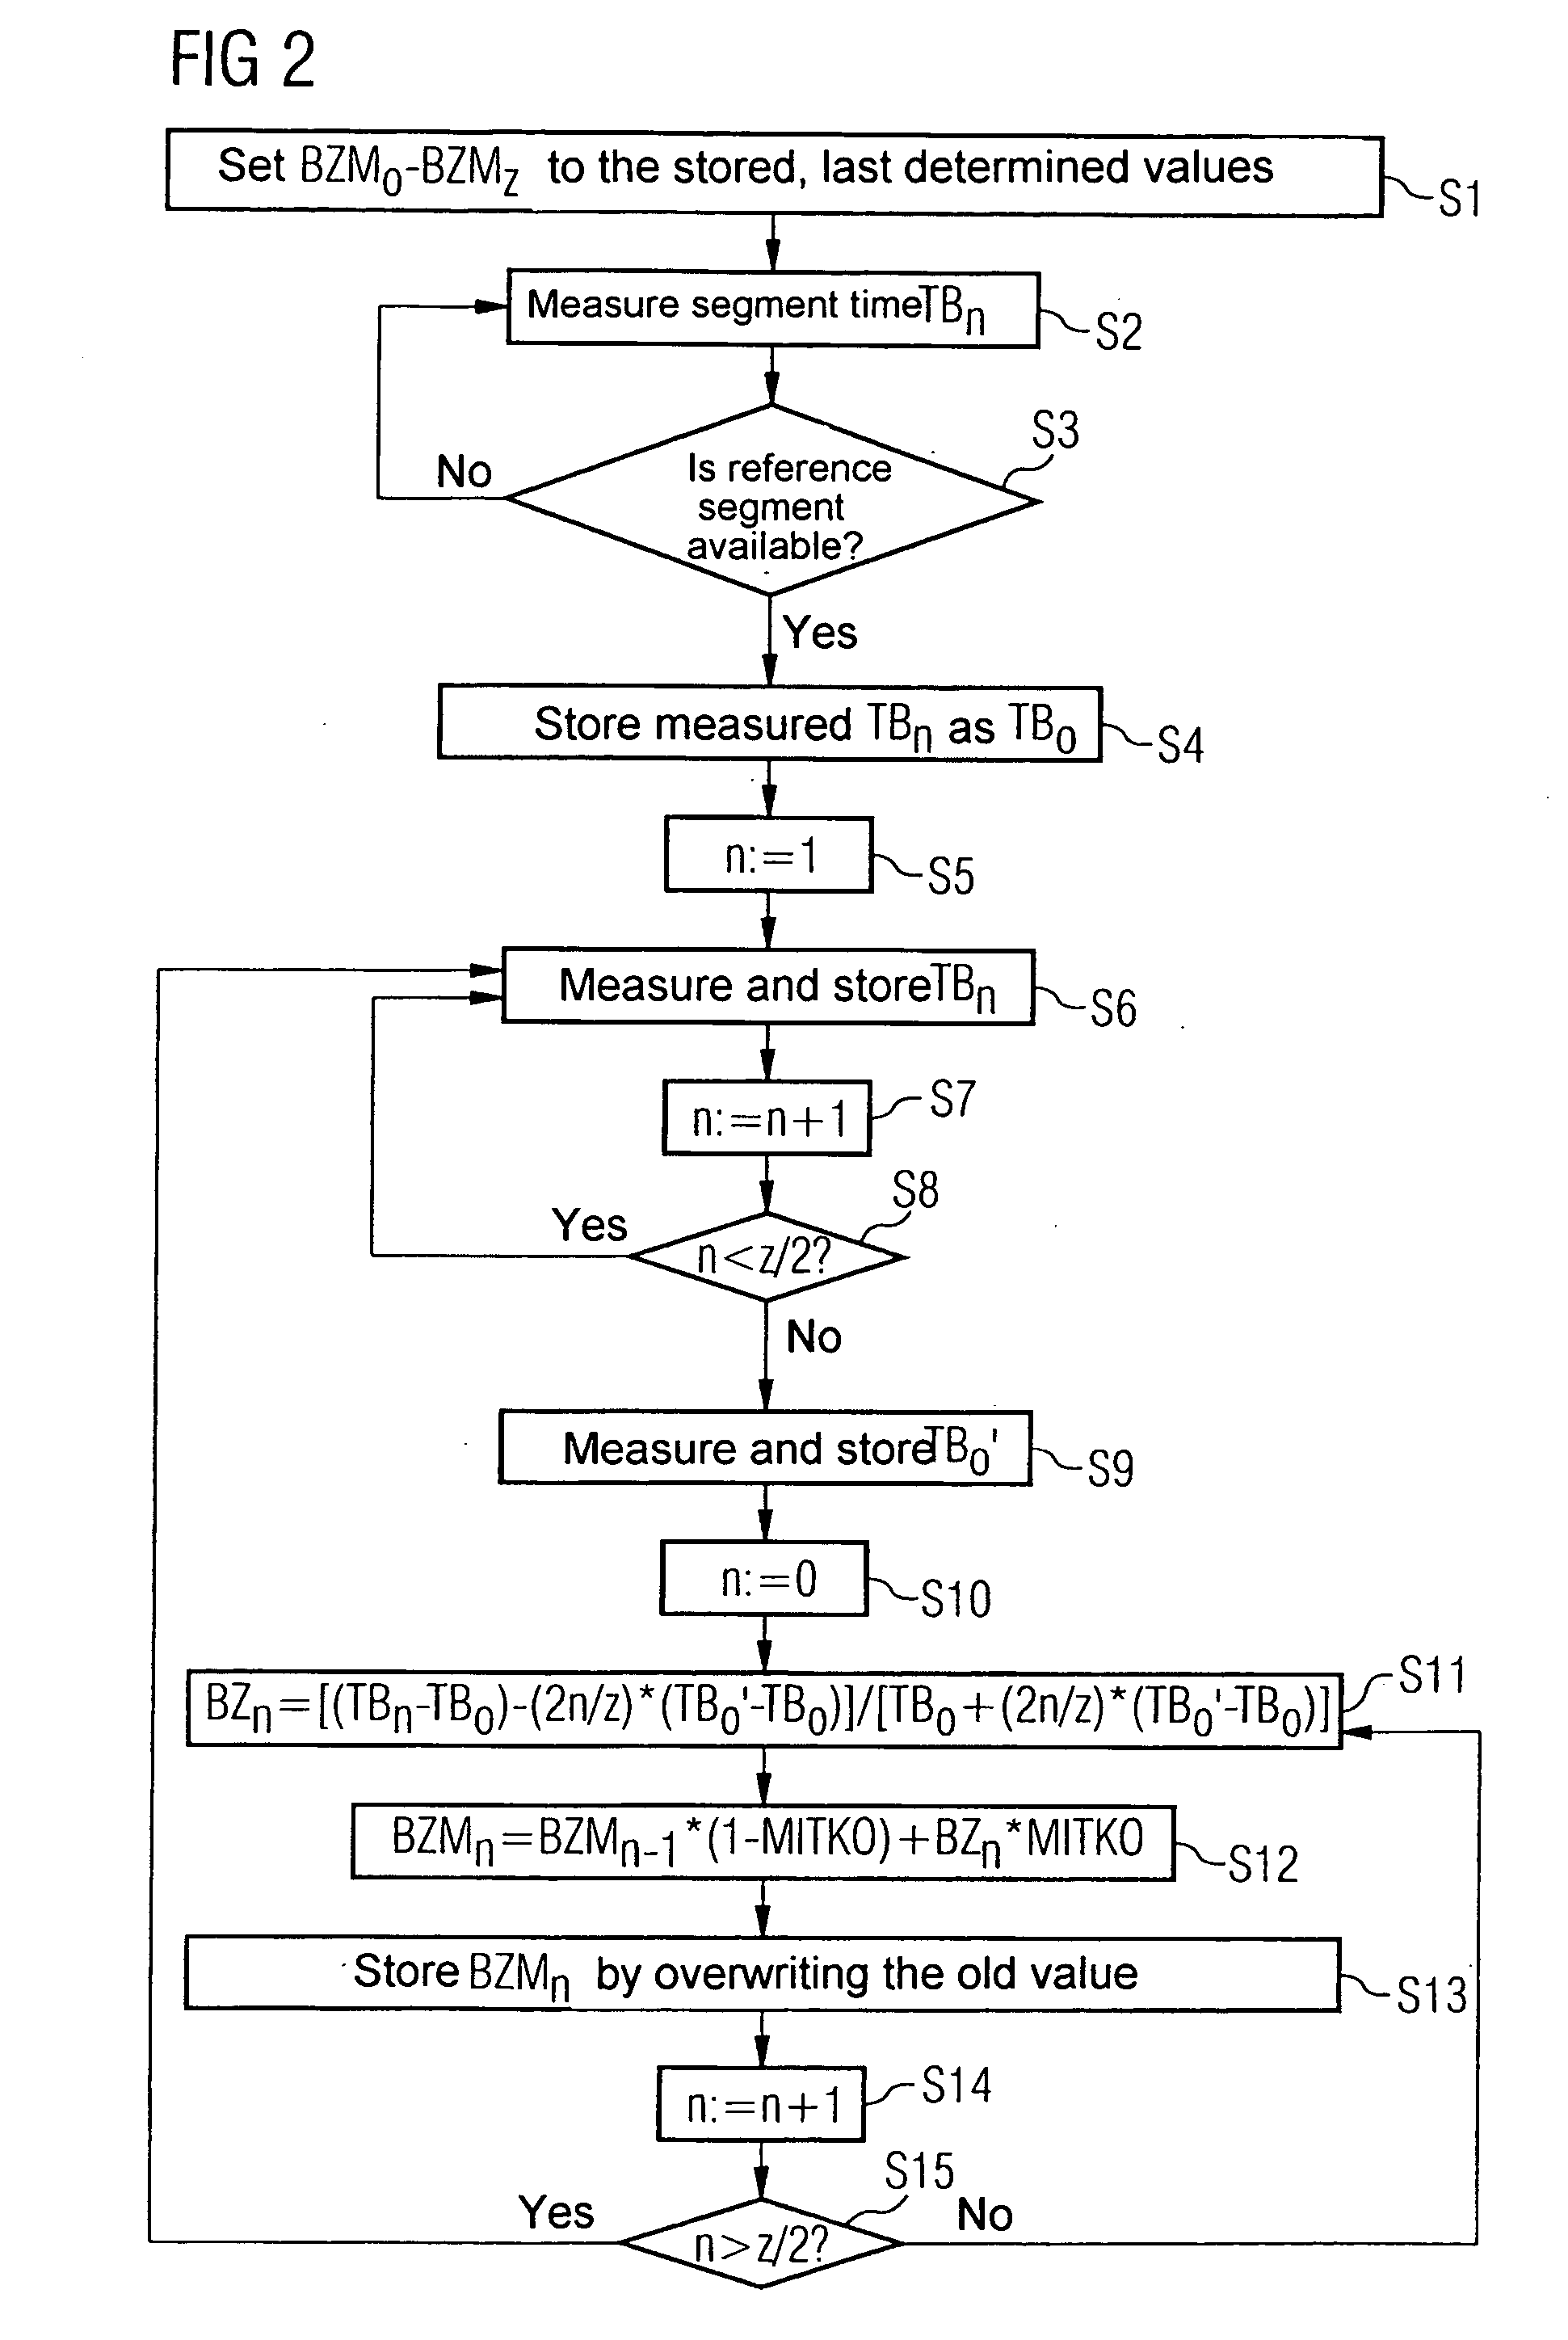 Methods and devices for determining a correction value for a measured segment time